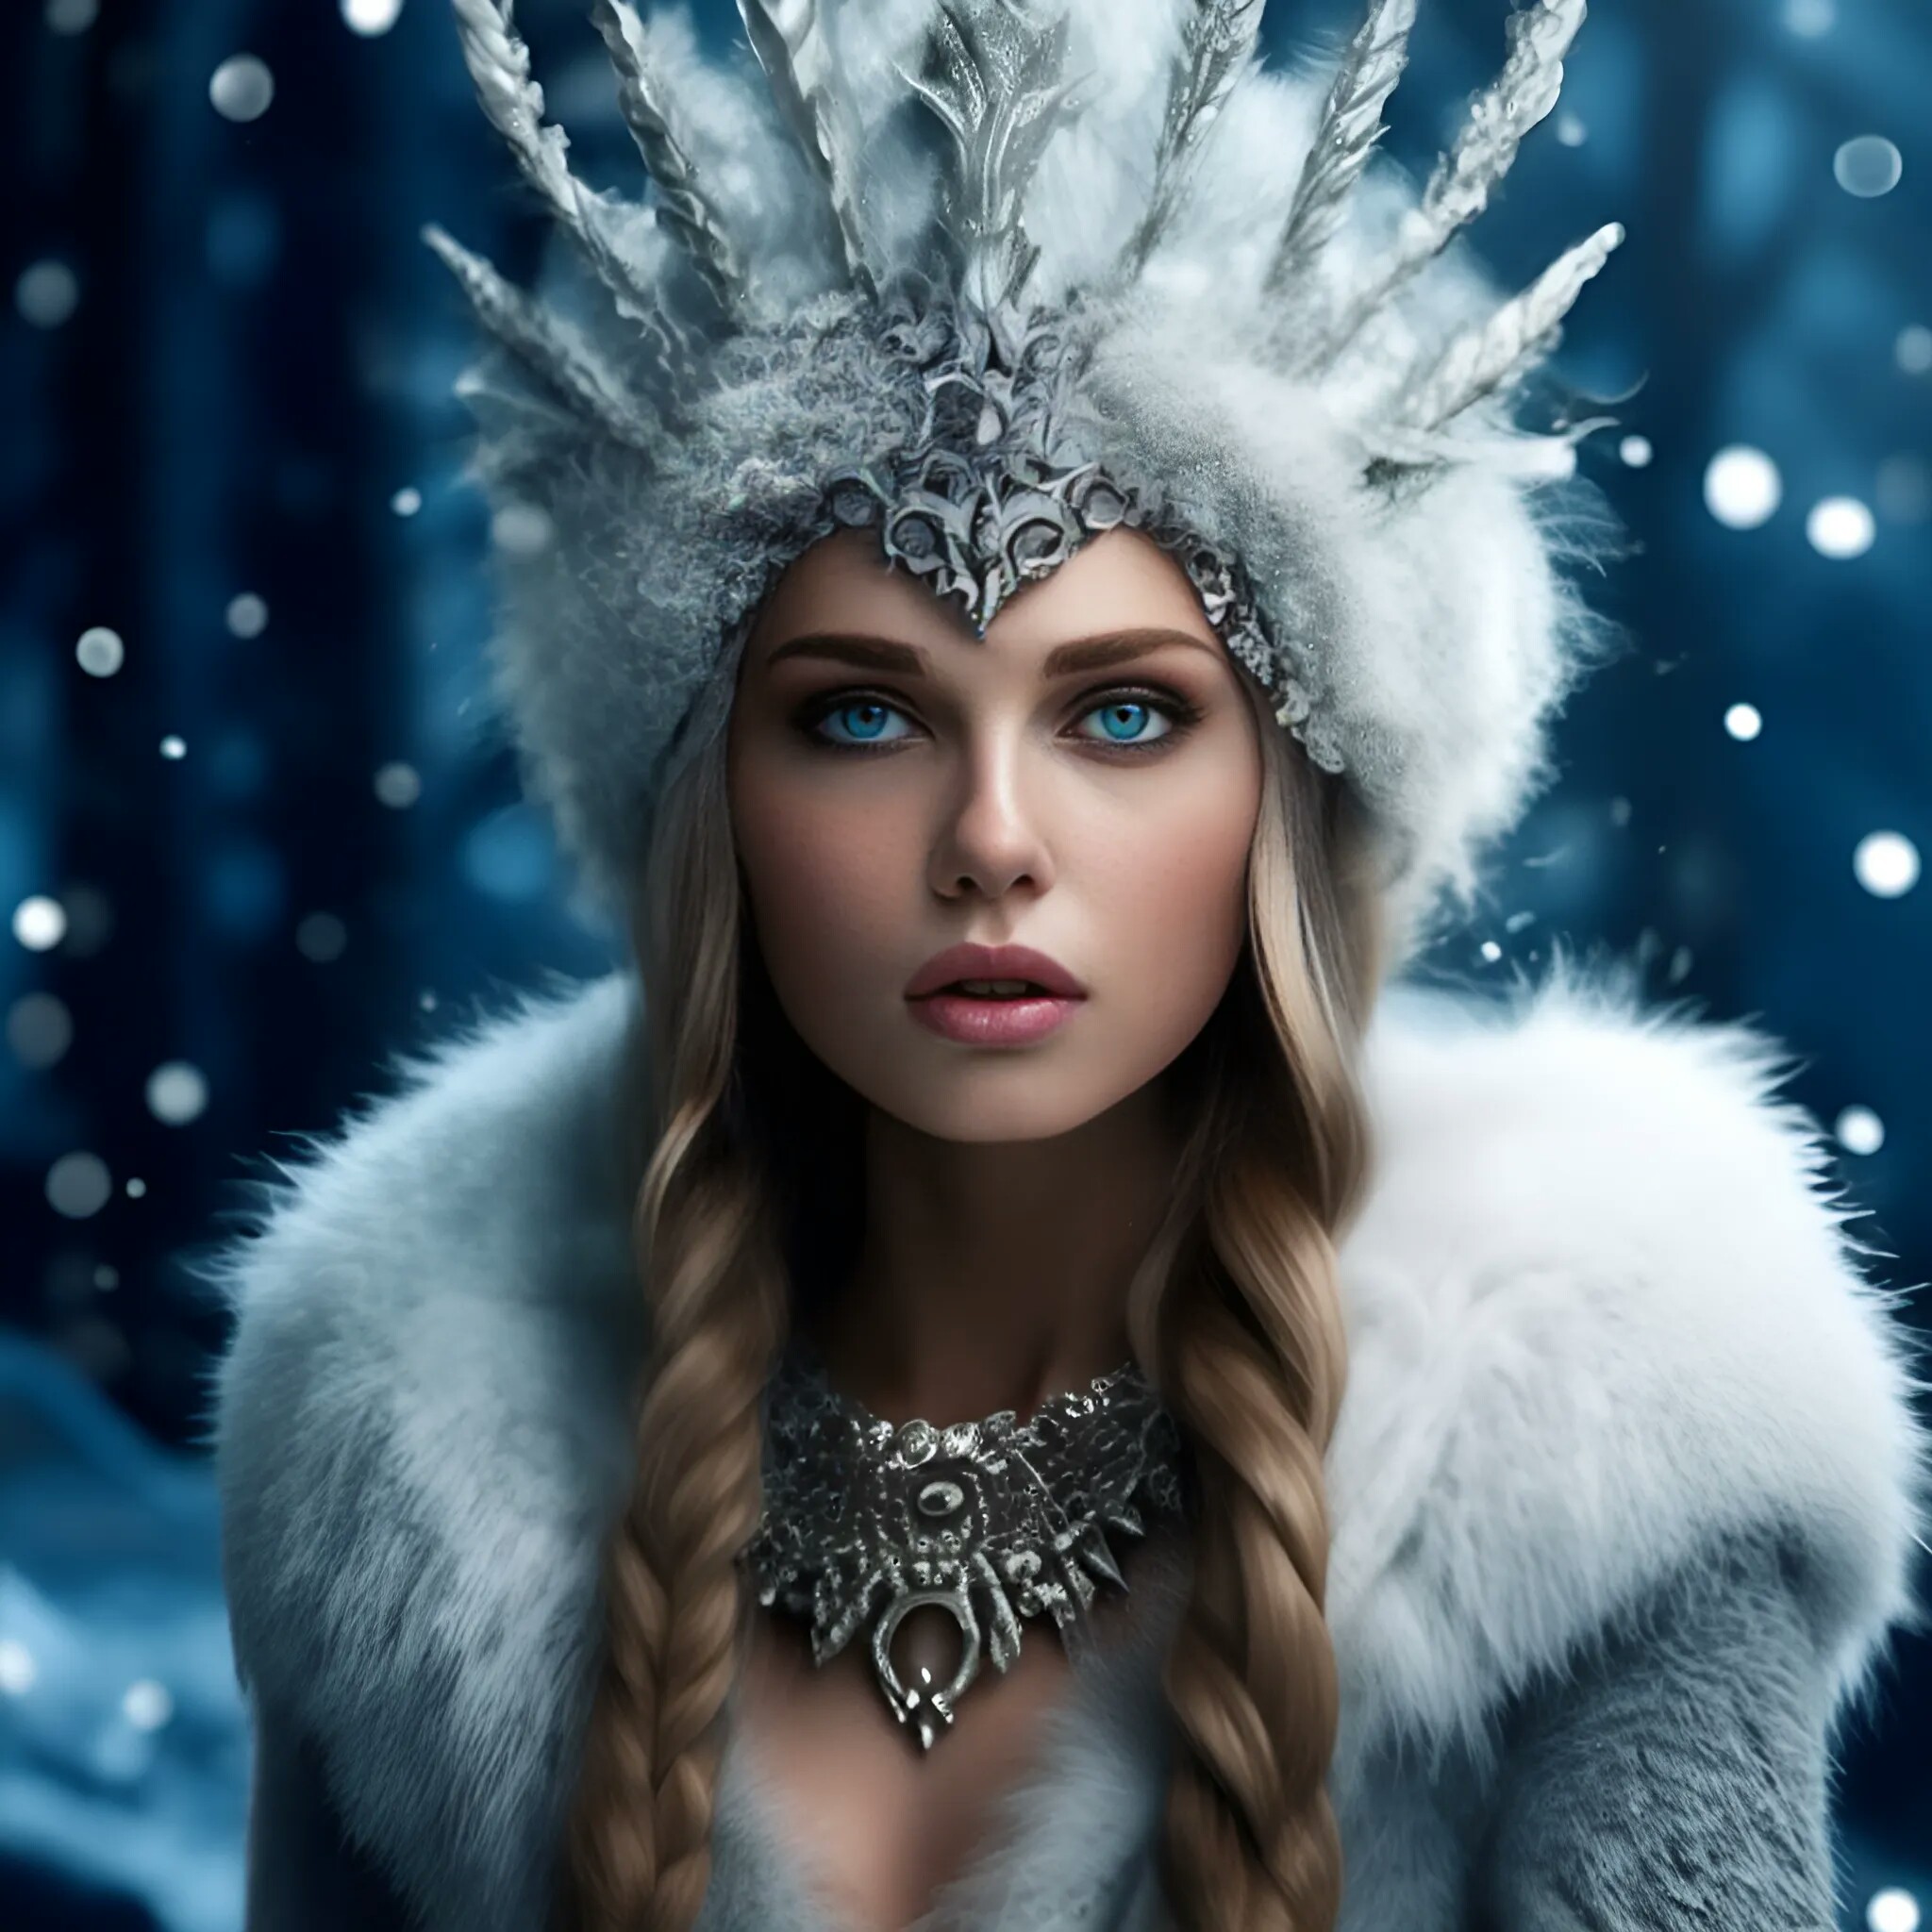 A snow queen in a winter forest.